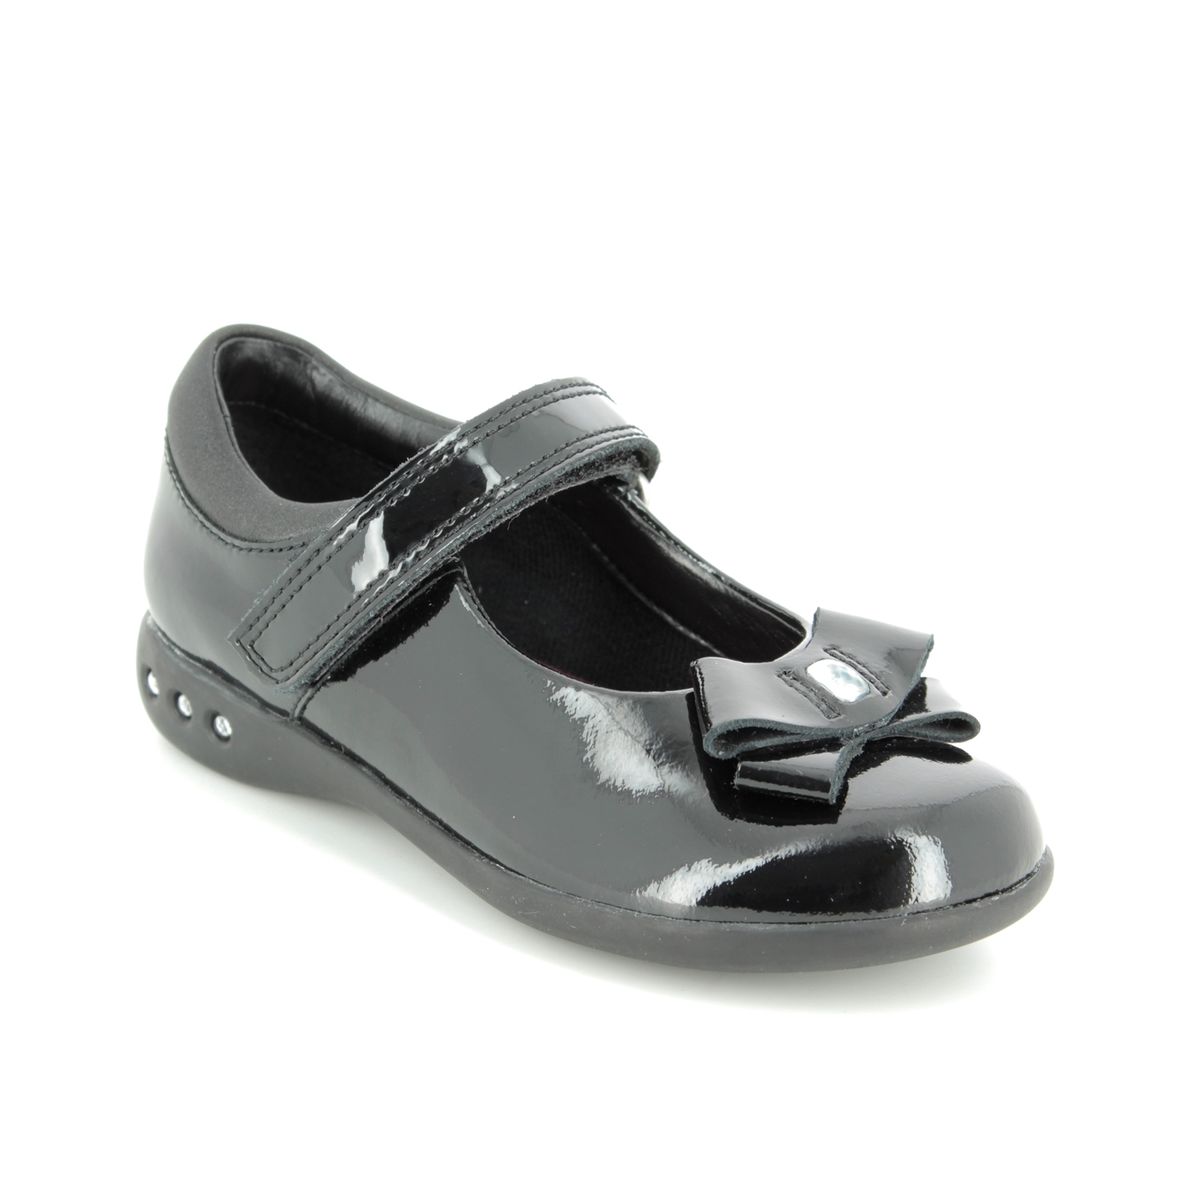 clarks grey patent shoes